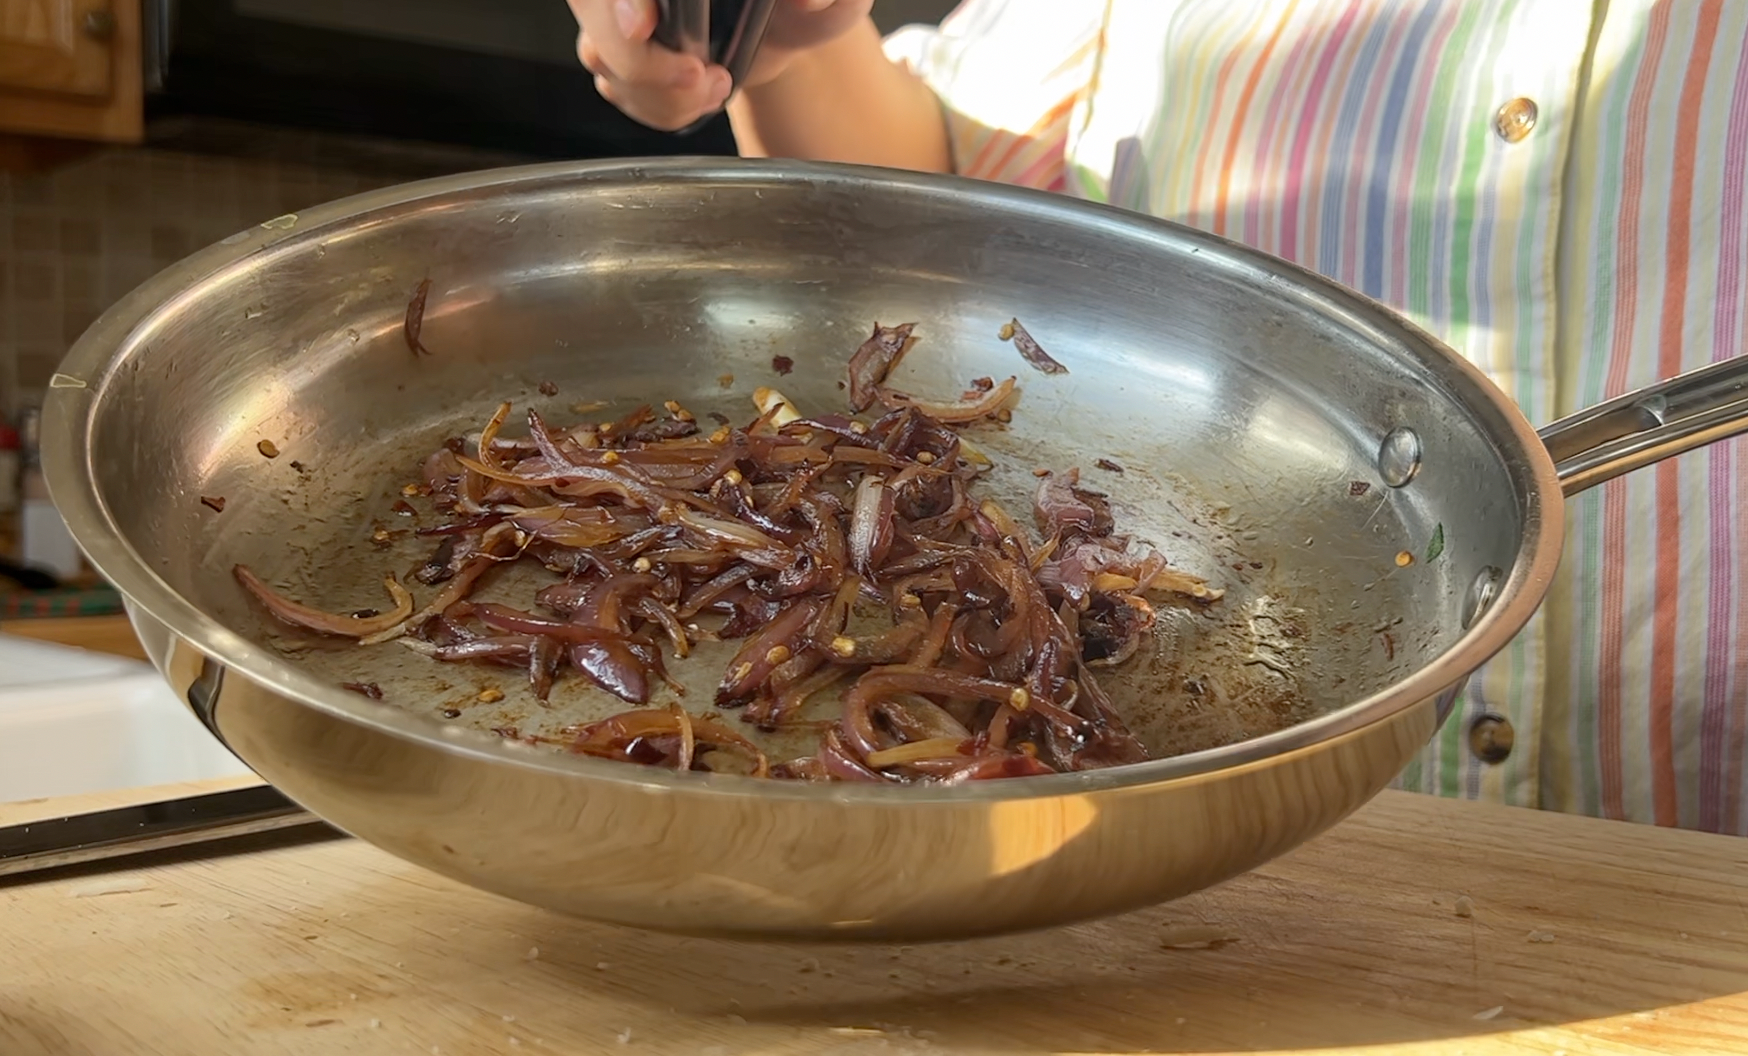 A pan of darkly cooked red onions